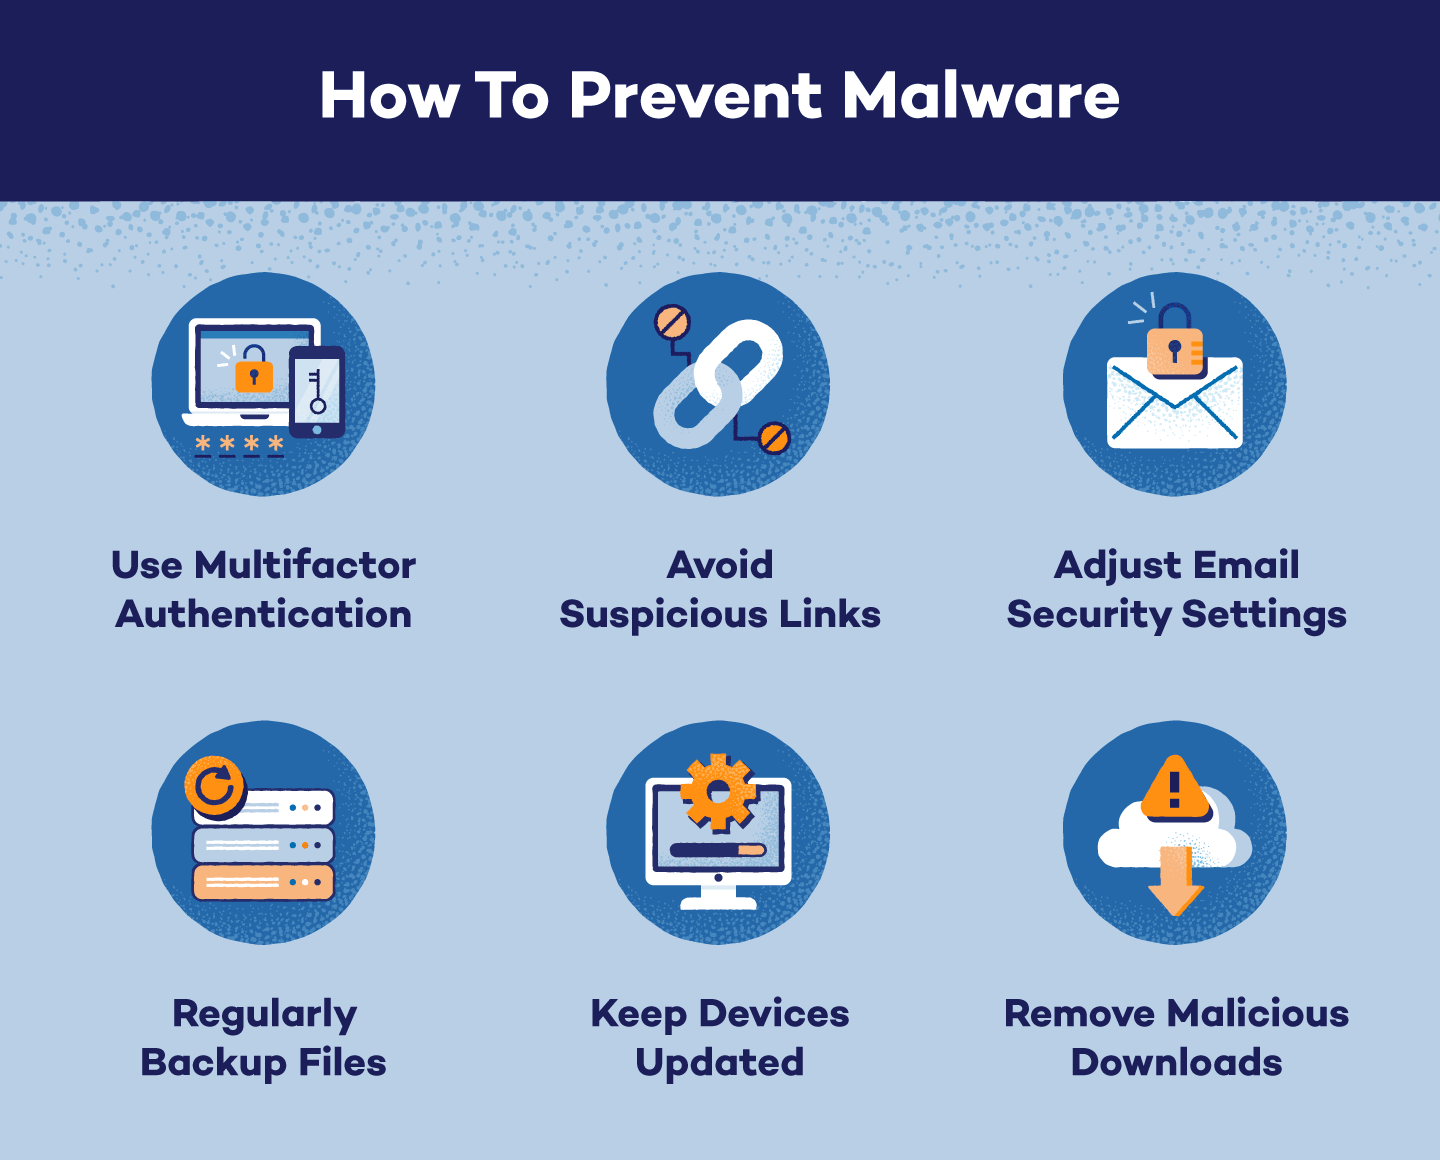 How to prevent malware attacks?